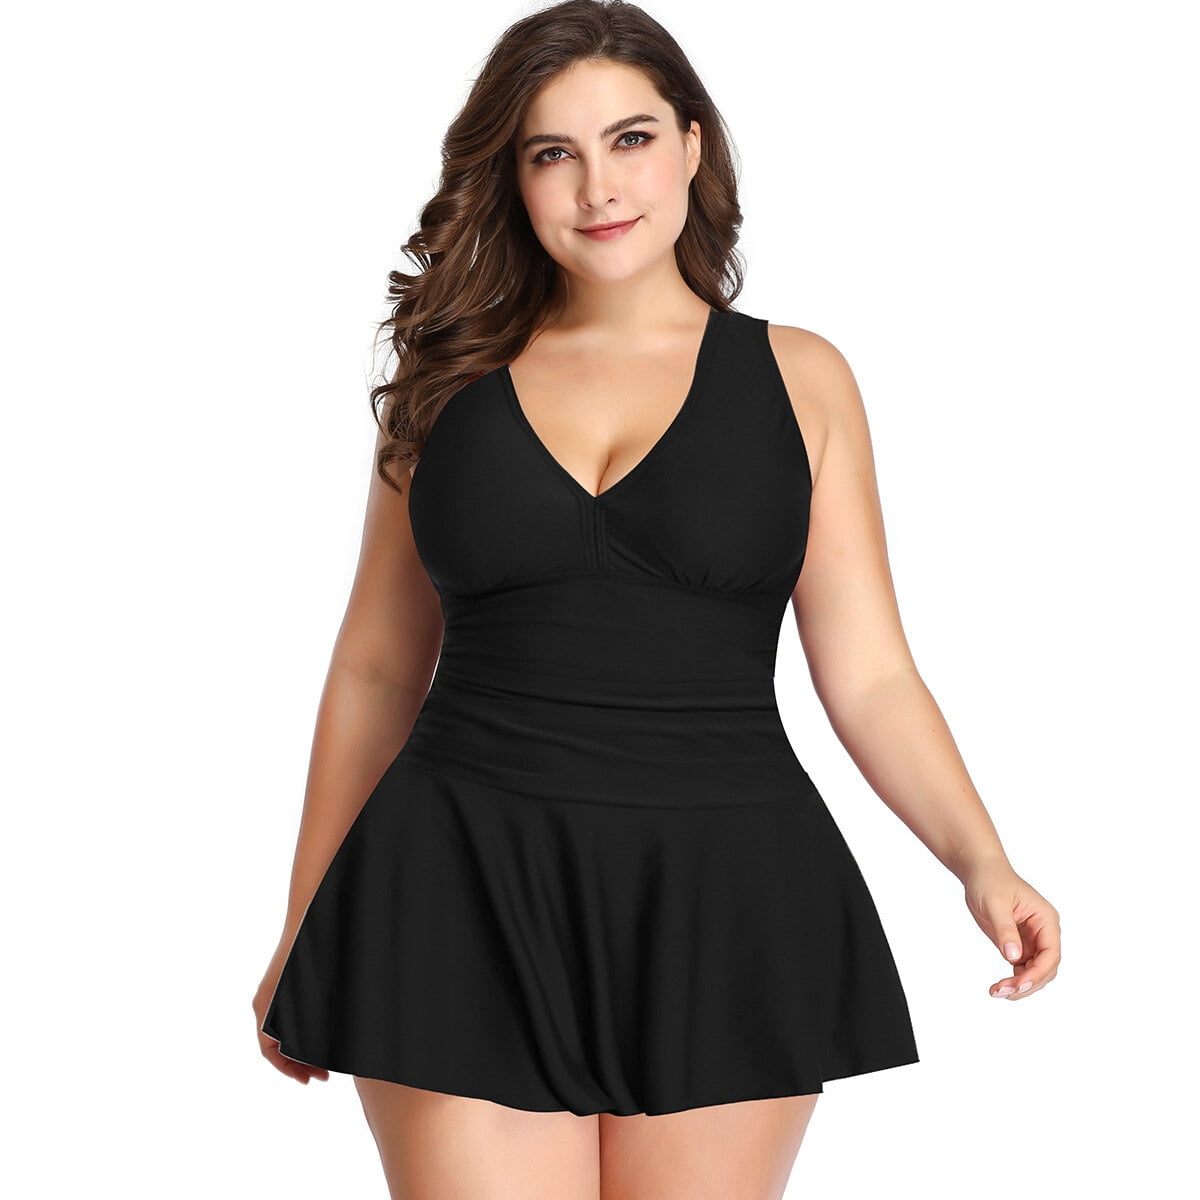 8 Very Cute Plus-Size Swimsuits You Can Buy At Walmart